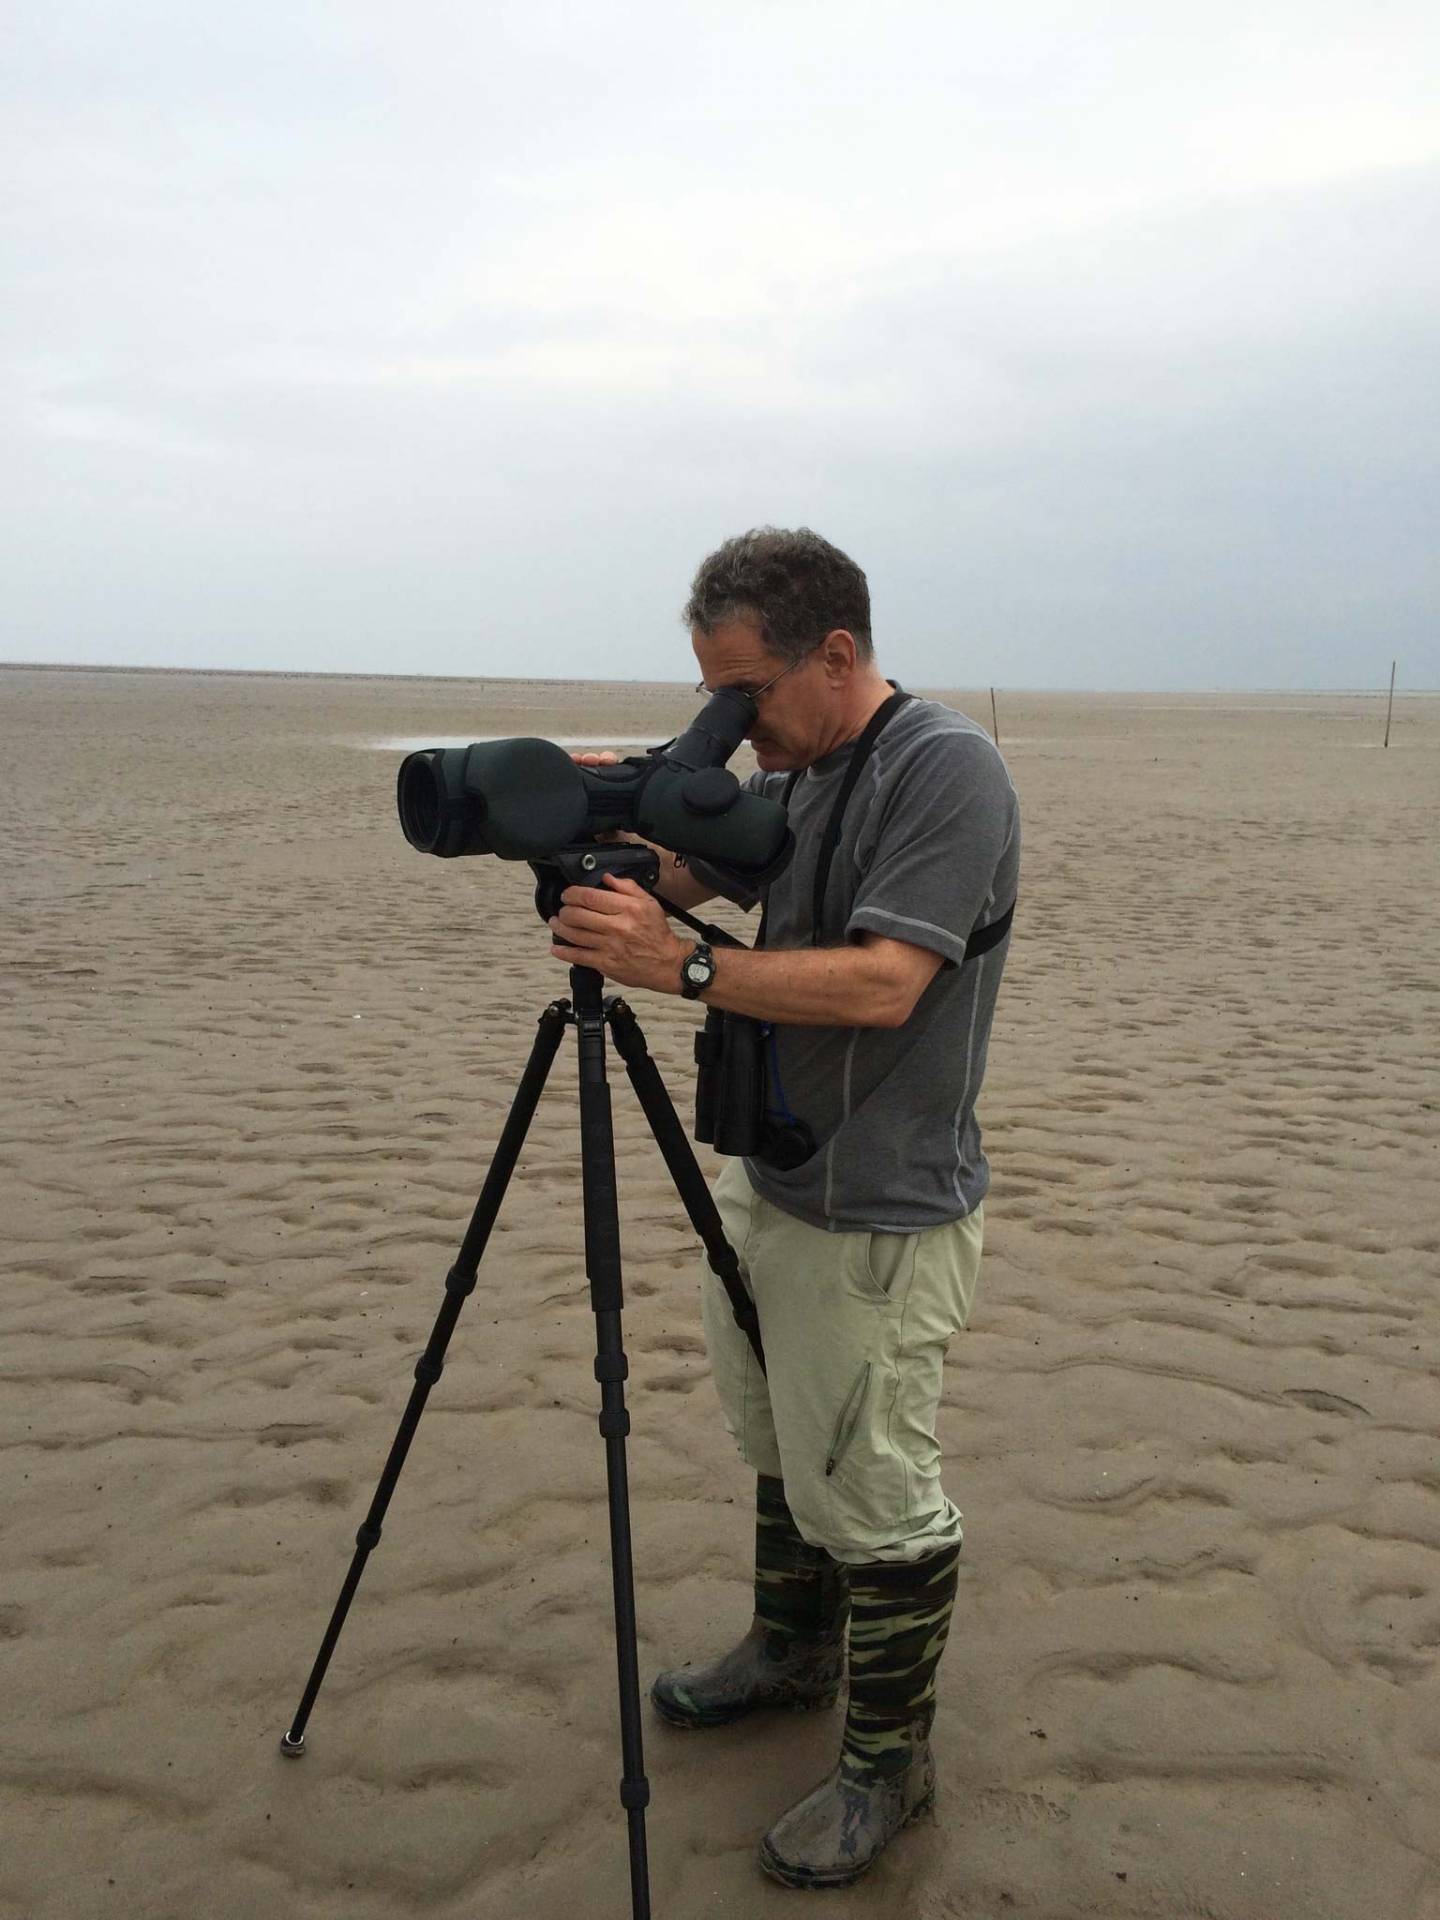 David Wilcove gathers data on a beach at low tide